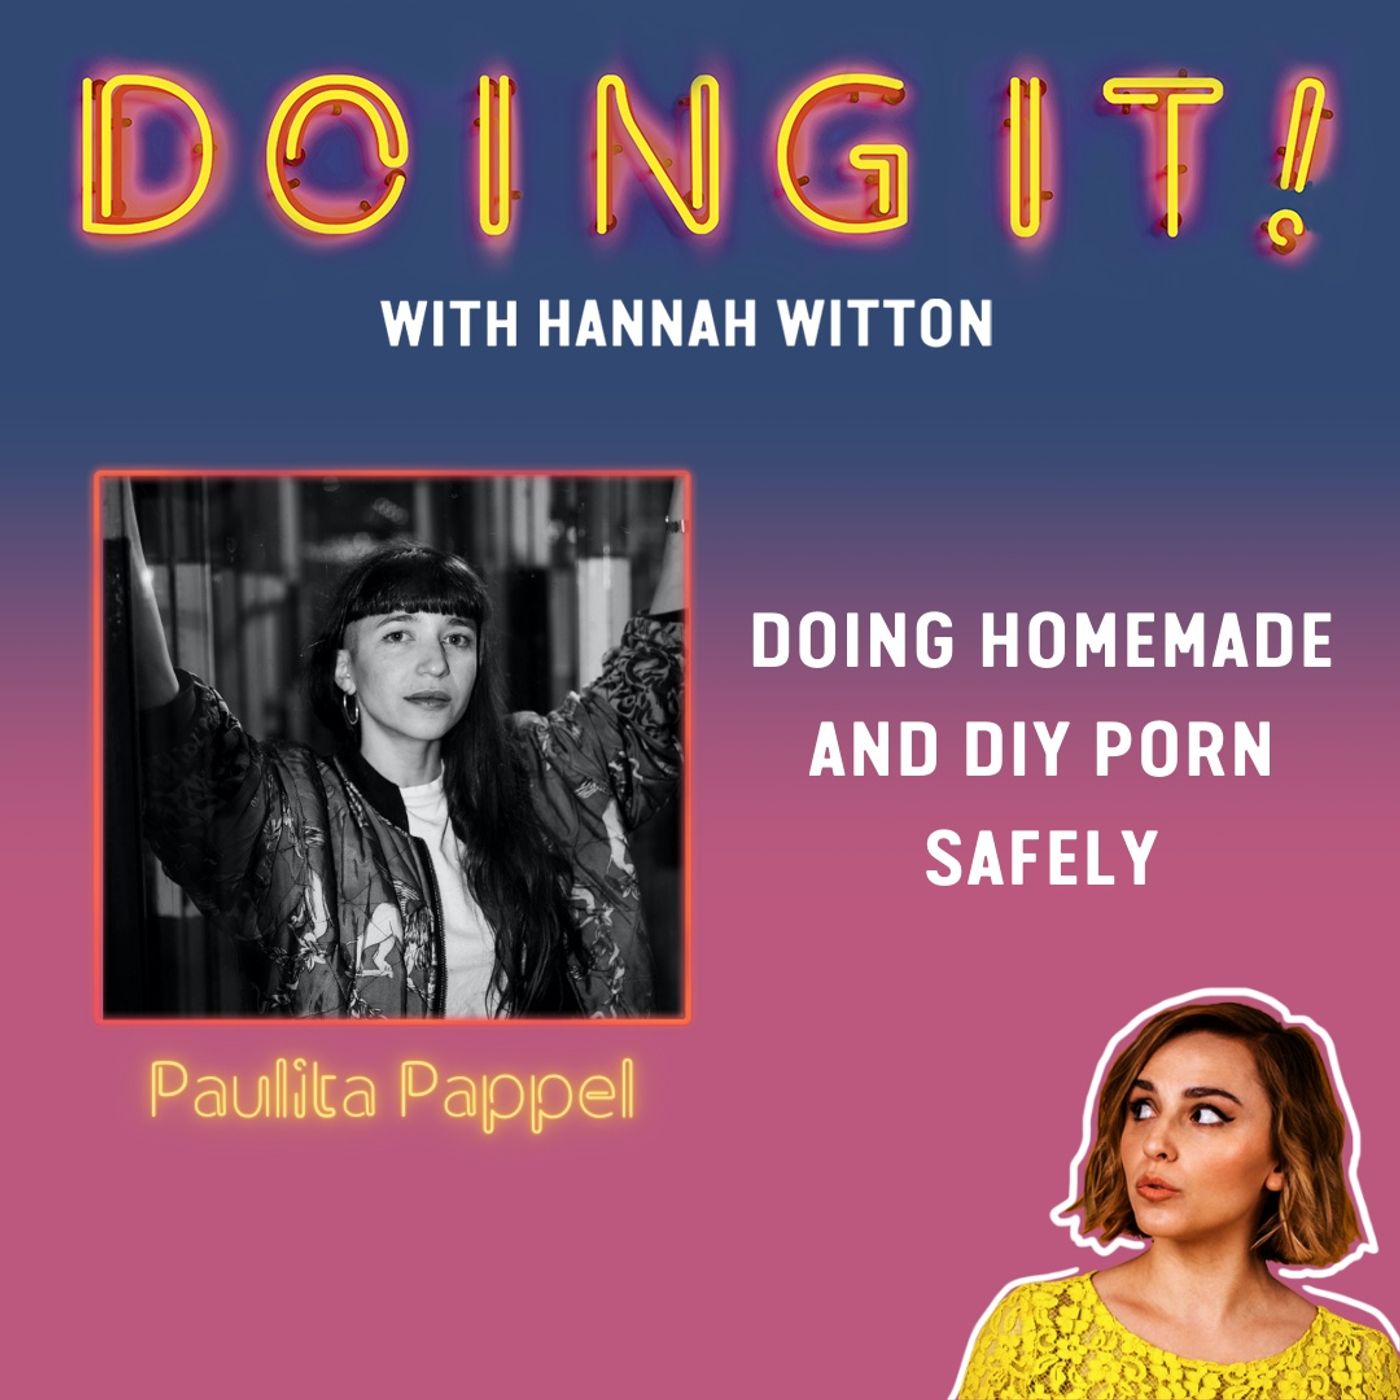 Doing Homemade and DIY Porn Safely with Paulita Pappel